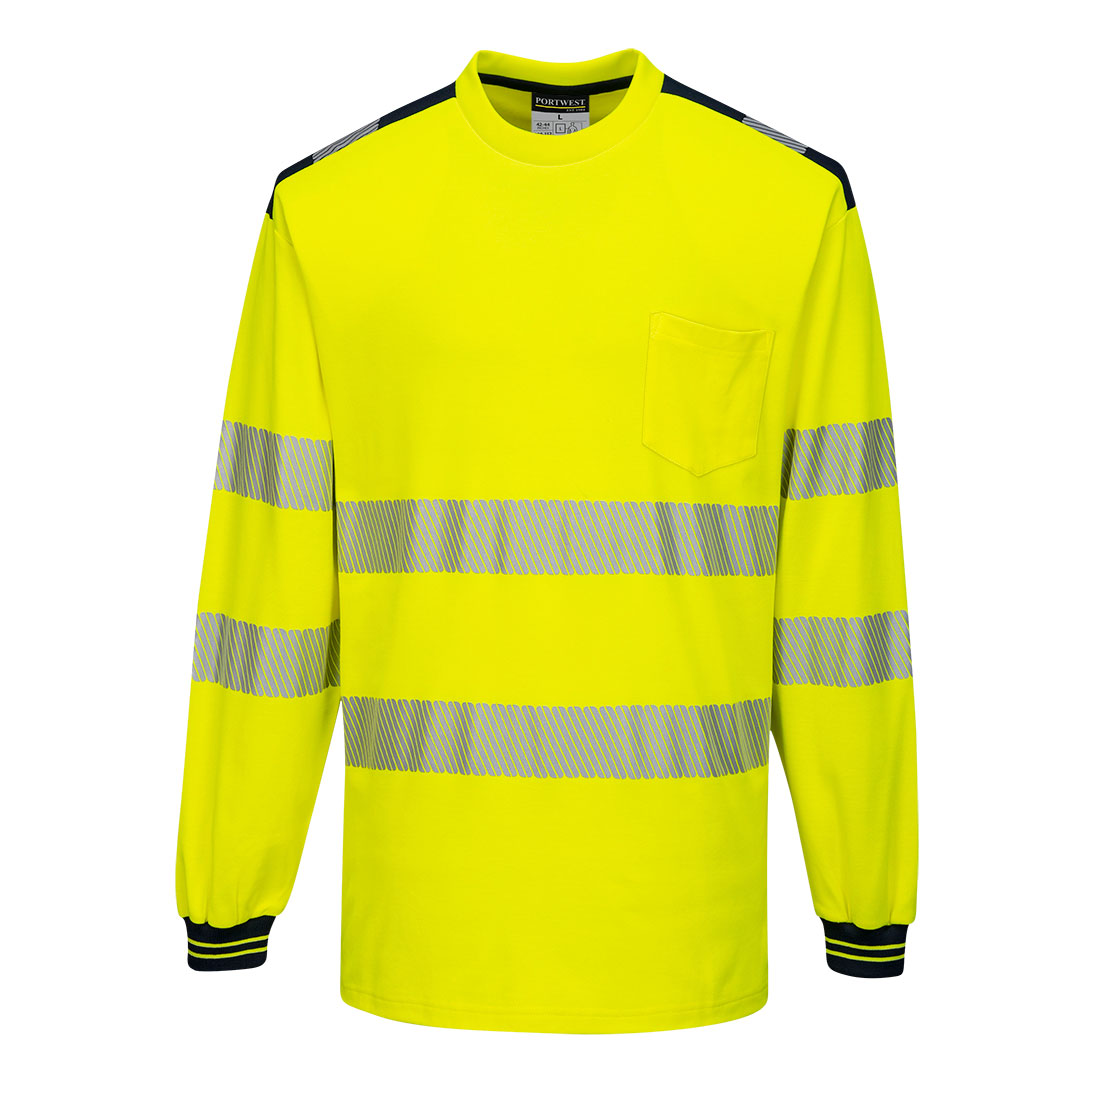 show original title Details about   T185 PW3 Hi-Vis Polo Shirt Long Sleeve Warning Protection Visibility Road Professional Outdoor 